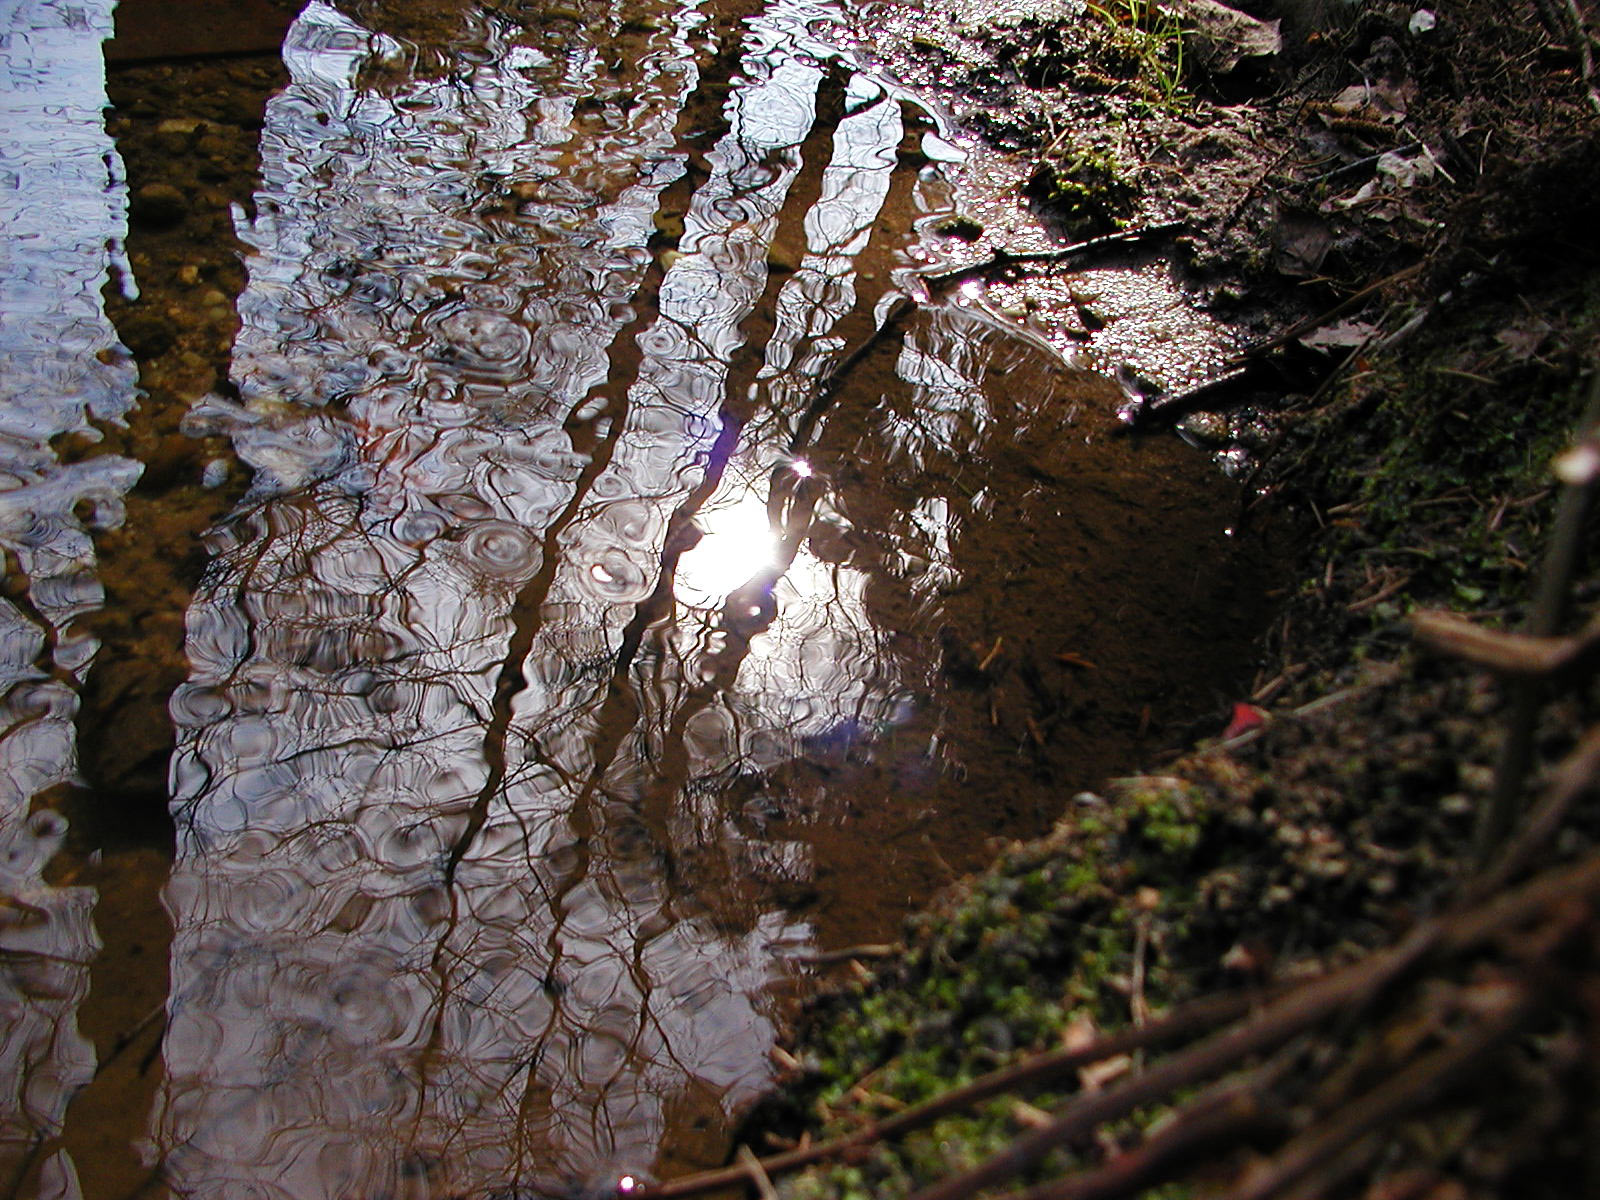 Reflecting water, Forest, Mud, Reflection, Tree, HQ Photo